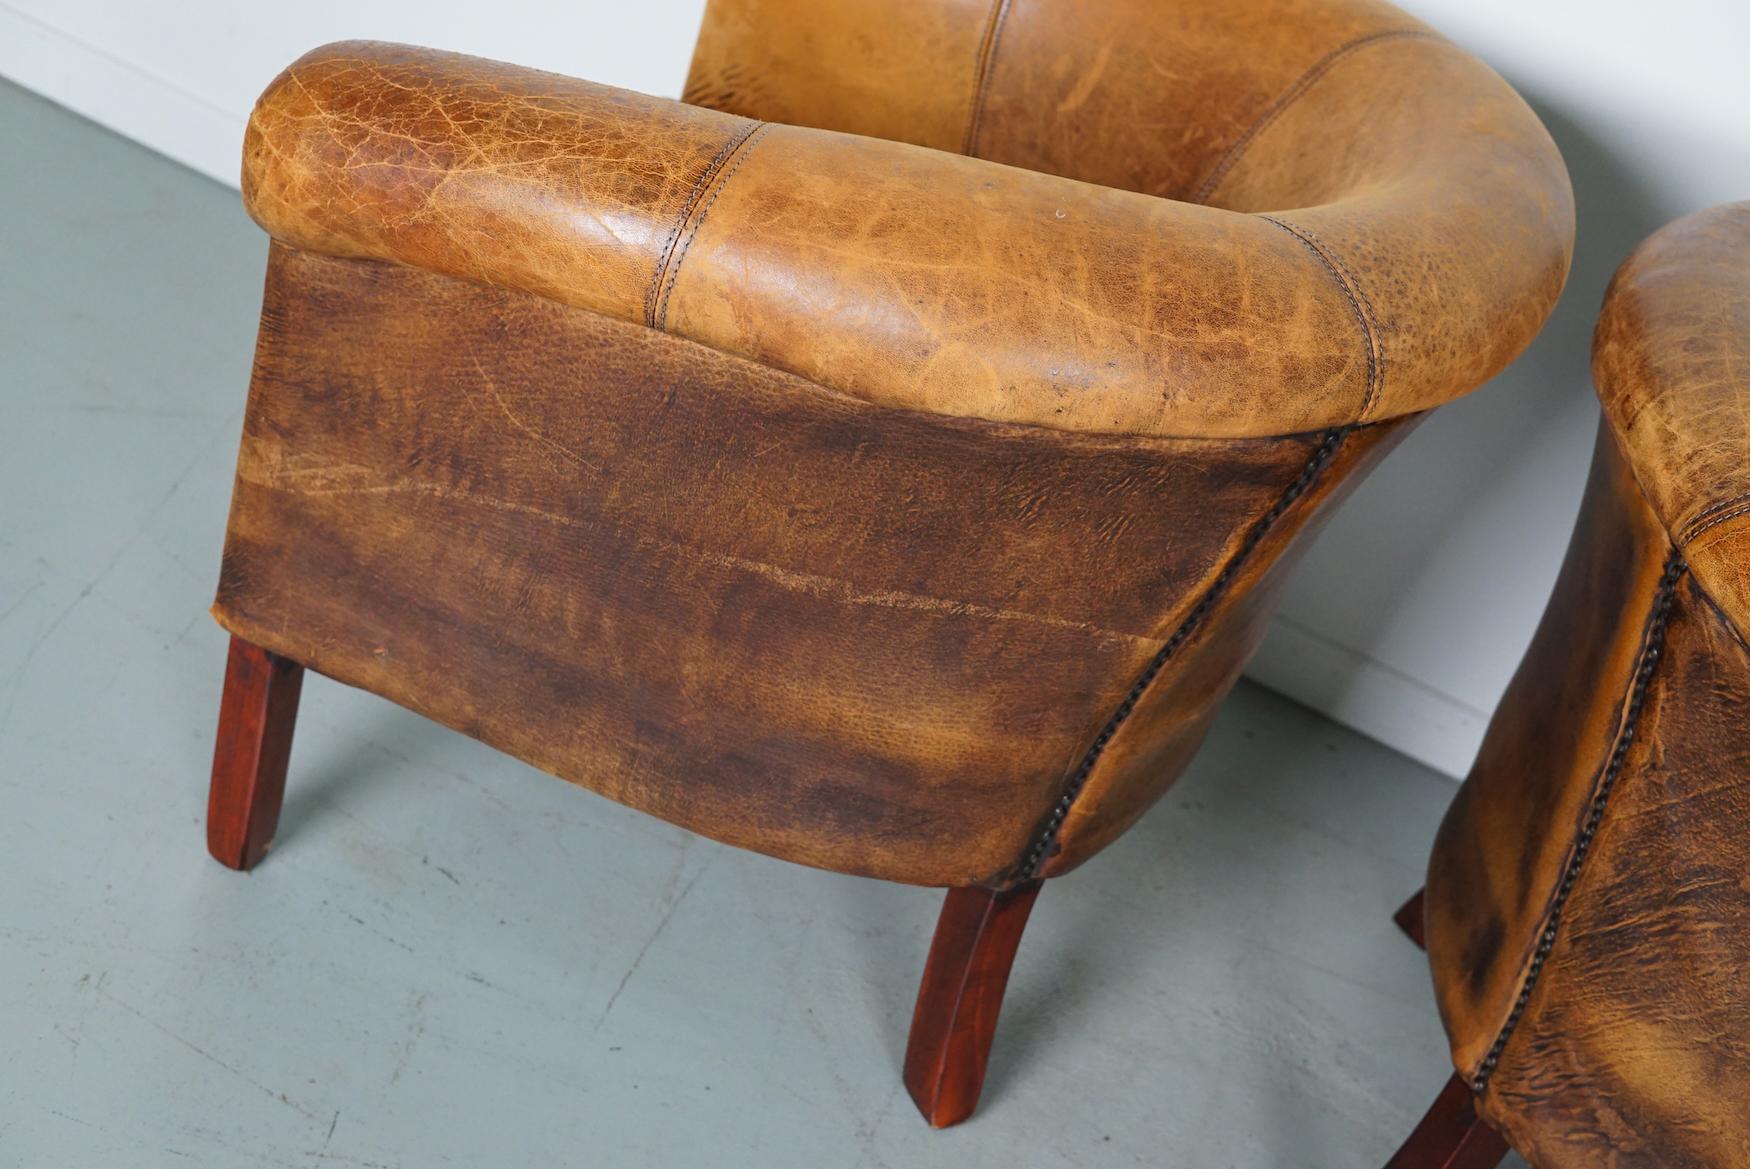 This pair of cognac-colored leather club chairs come from the Netherlands. They are upholstered with cognac-colored leather and feature metal rivets and wooden legs. The ottomans have the following measurements: D 39 x W 48 x H 35 cm.